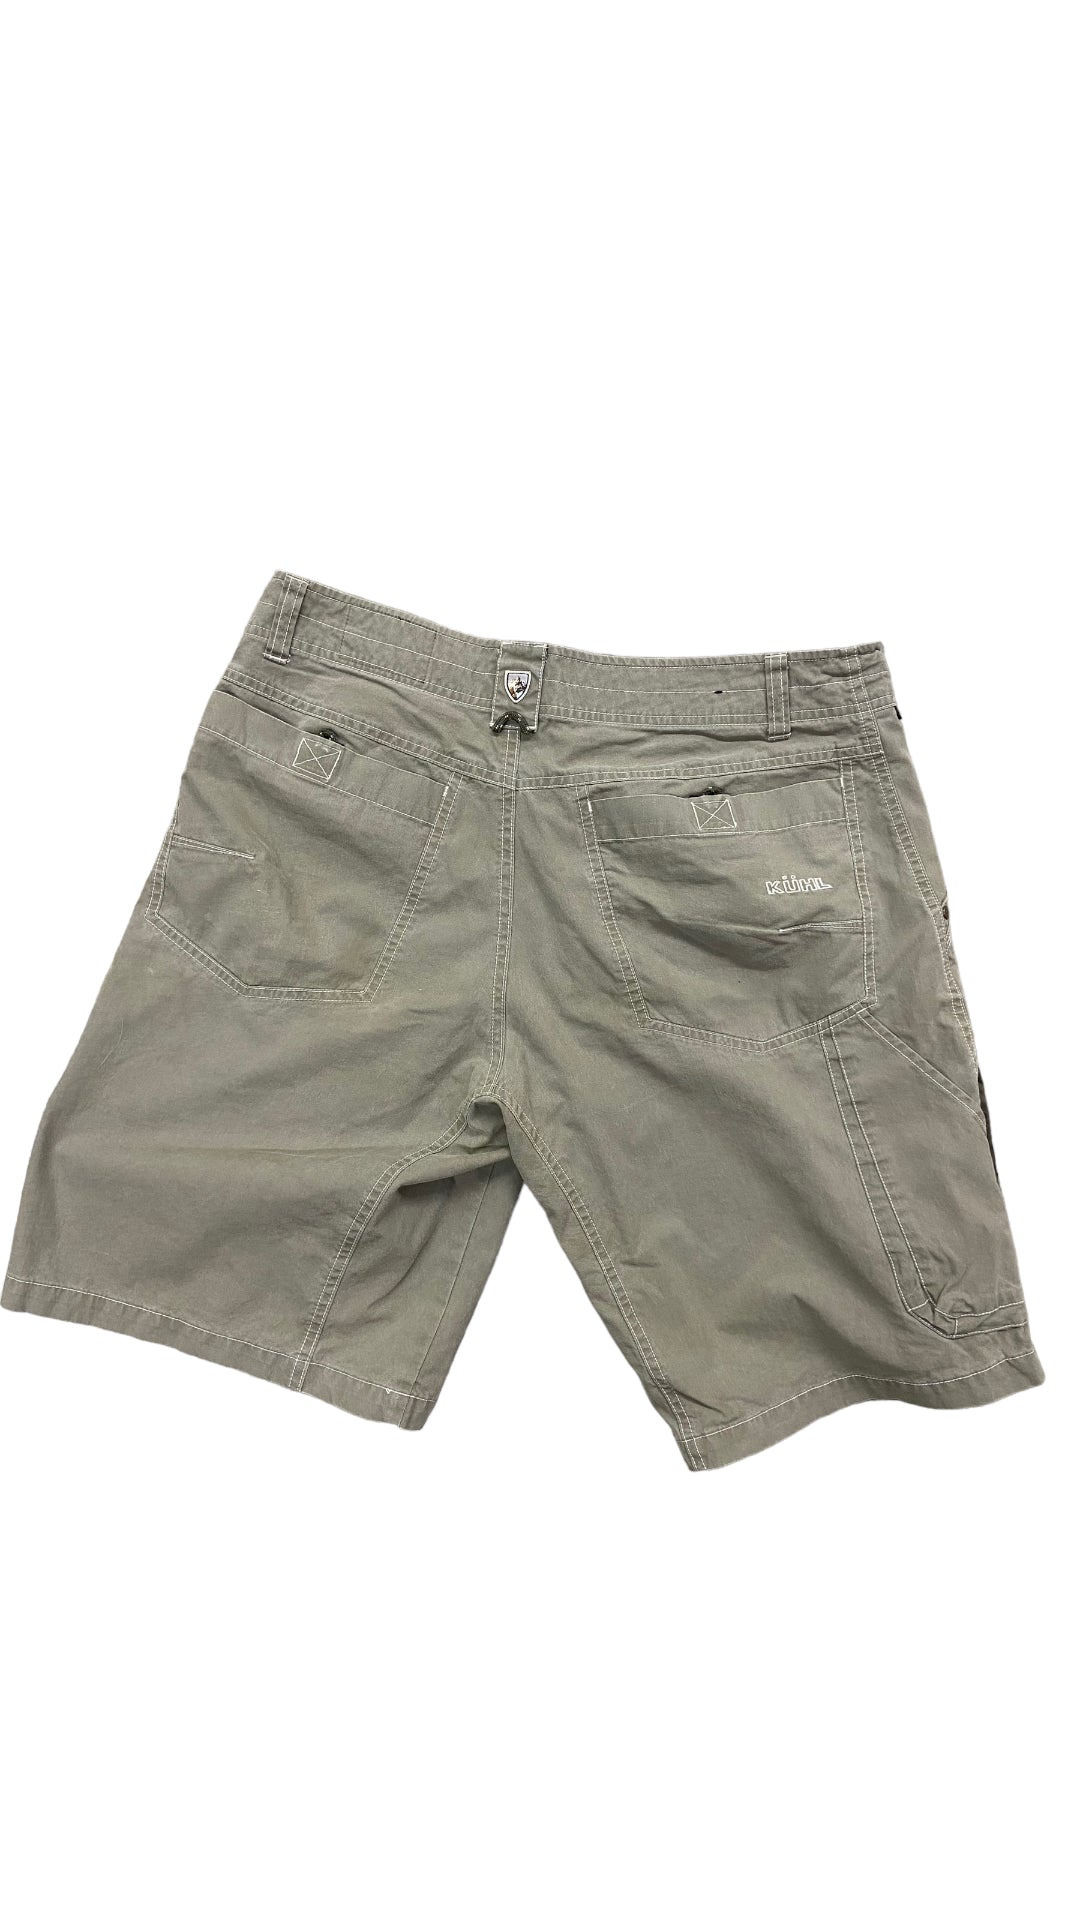 VTG Kuhl Born In The Mountains Out Door Shorts Sz 36x11